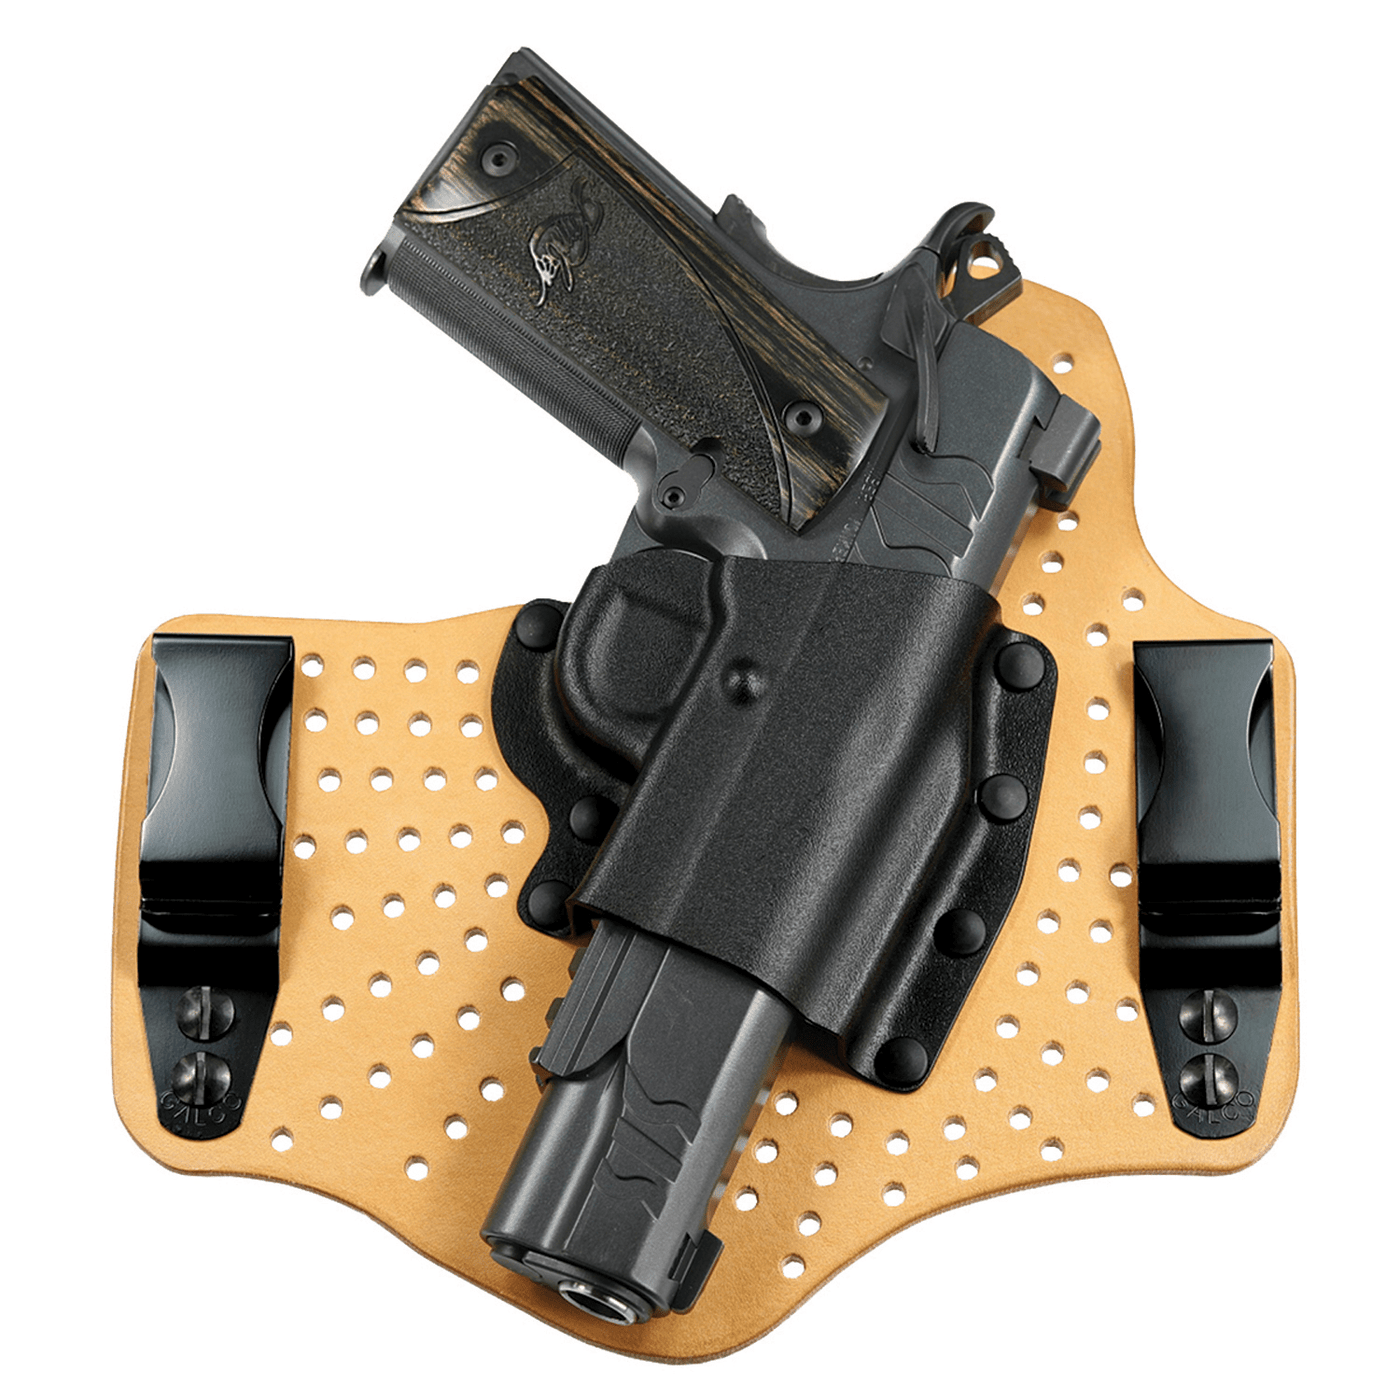 Galco Galco Kingtuk Air Iwb Holster - Rh Hybrid Glock 43 Natural Holsters And Related Items